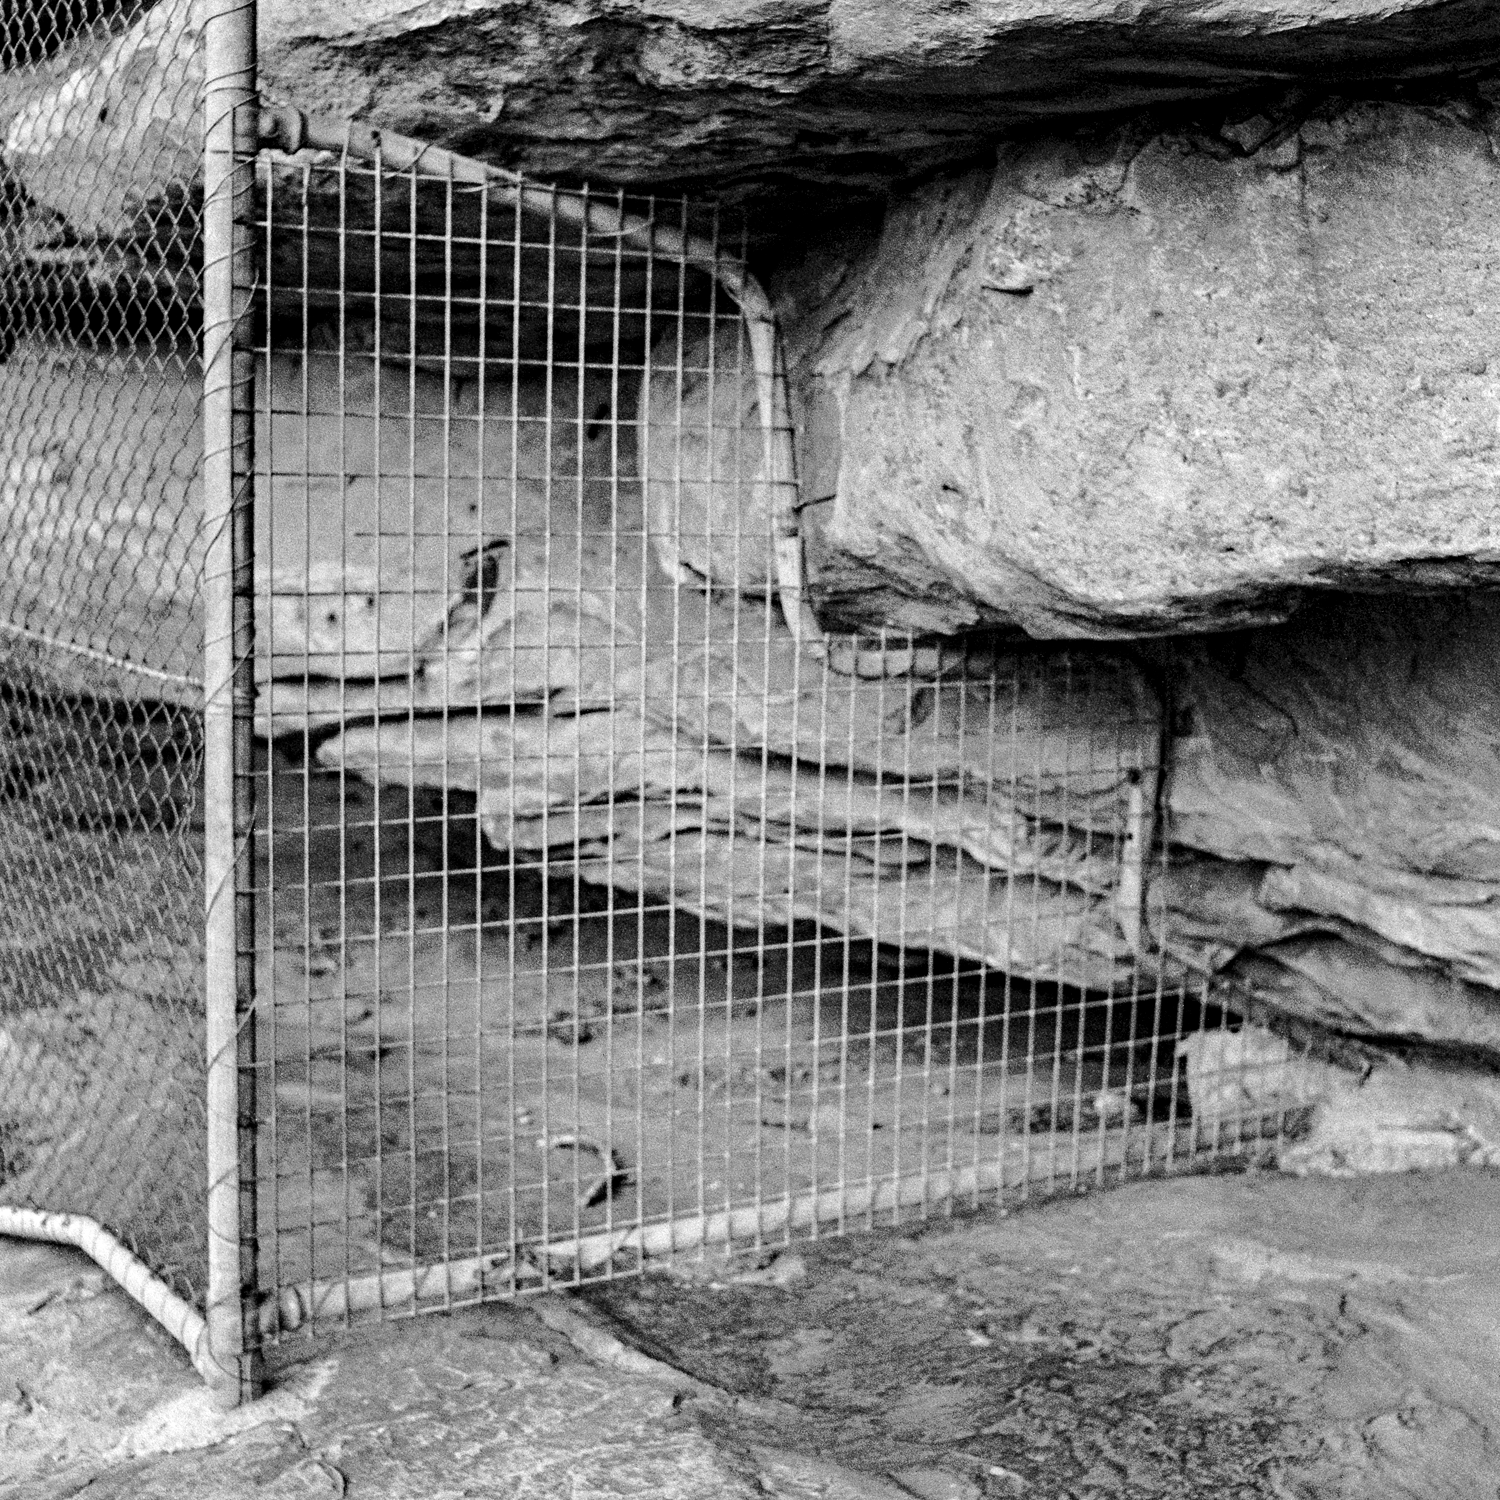 Black and white photograph depicting chainlink fence moulded to fit rock face.